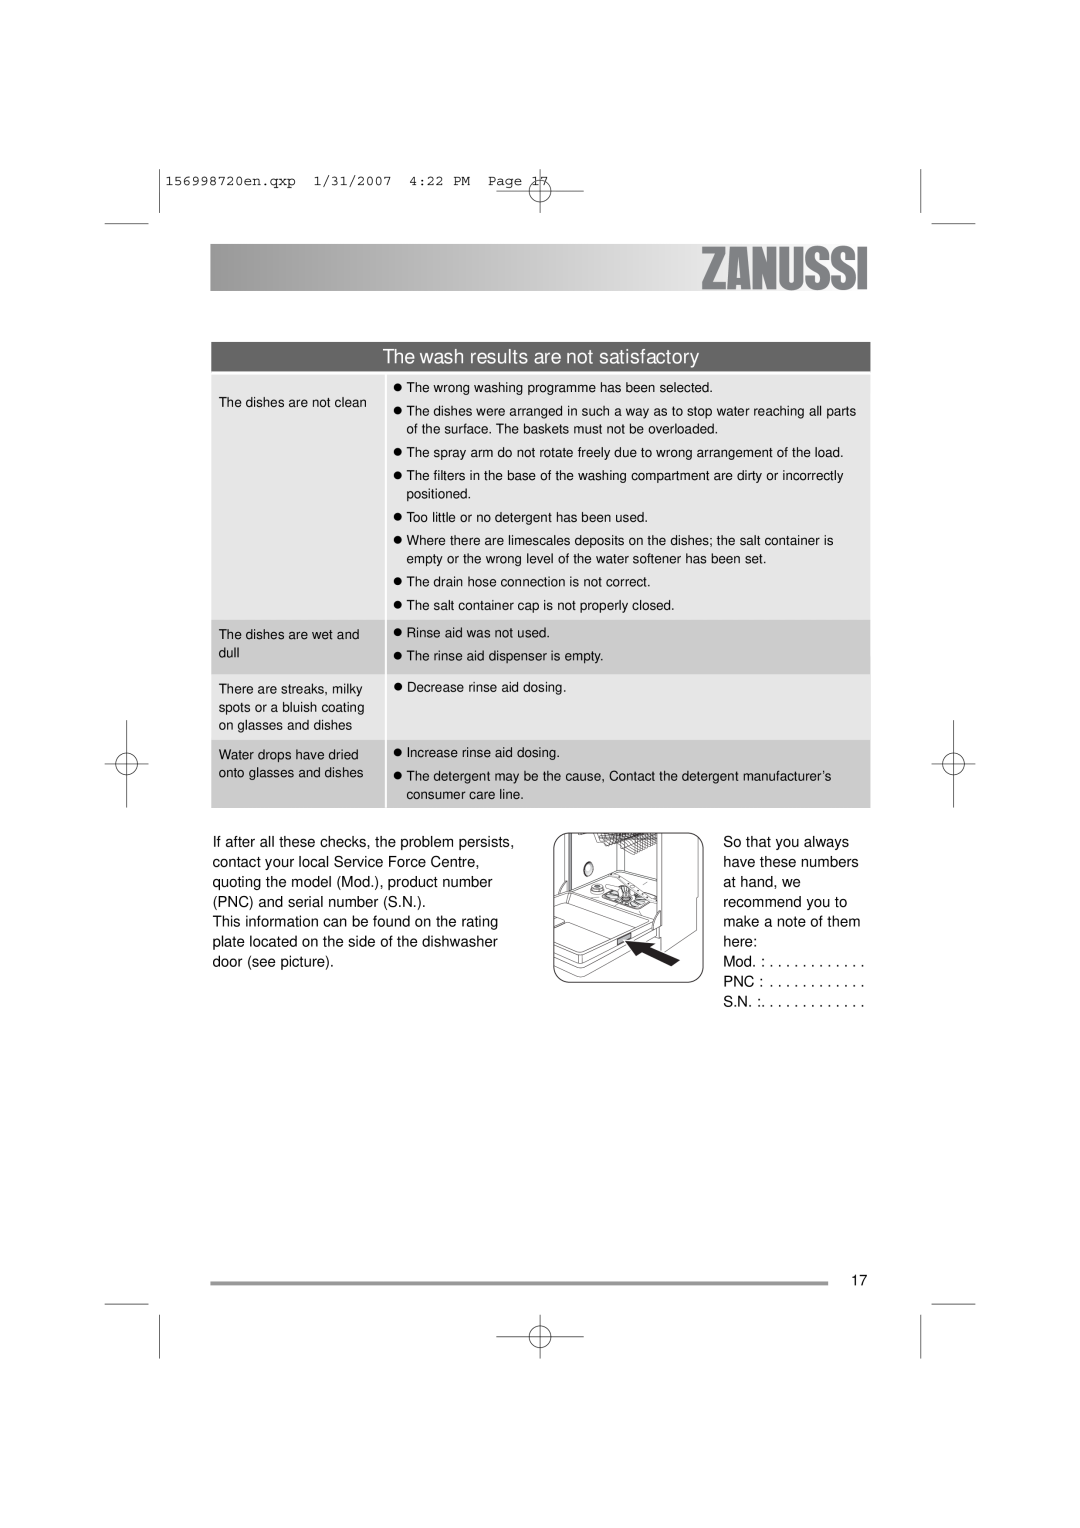 Zanussi ZDI 100 The wash results are not satisfactory, If after all these checks, the problem persists, at hand, we, here 